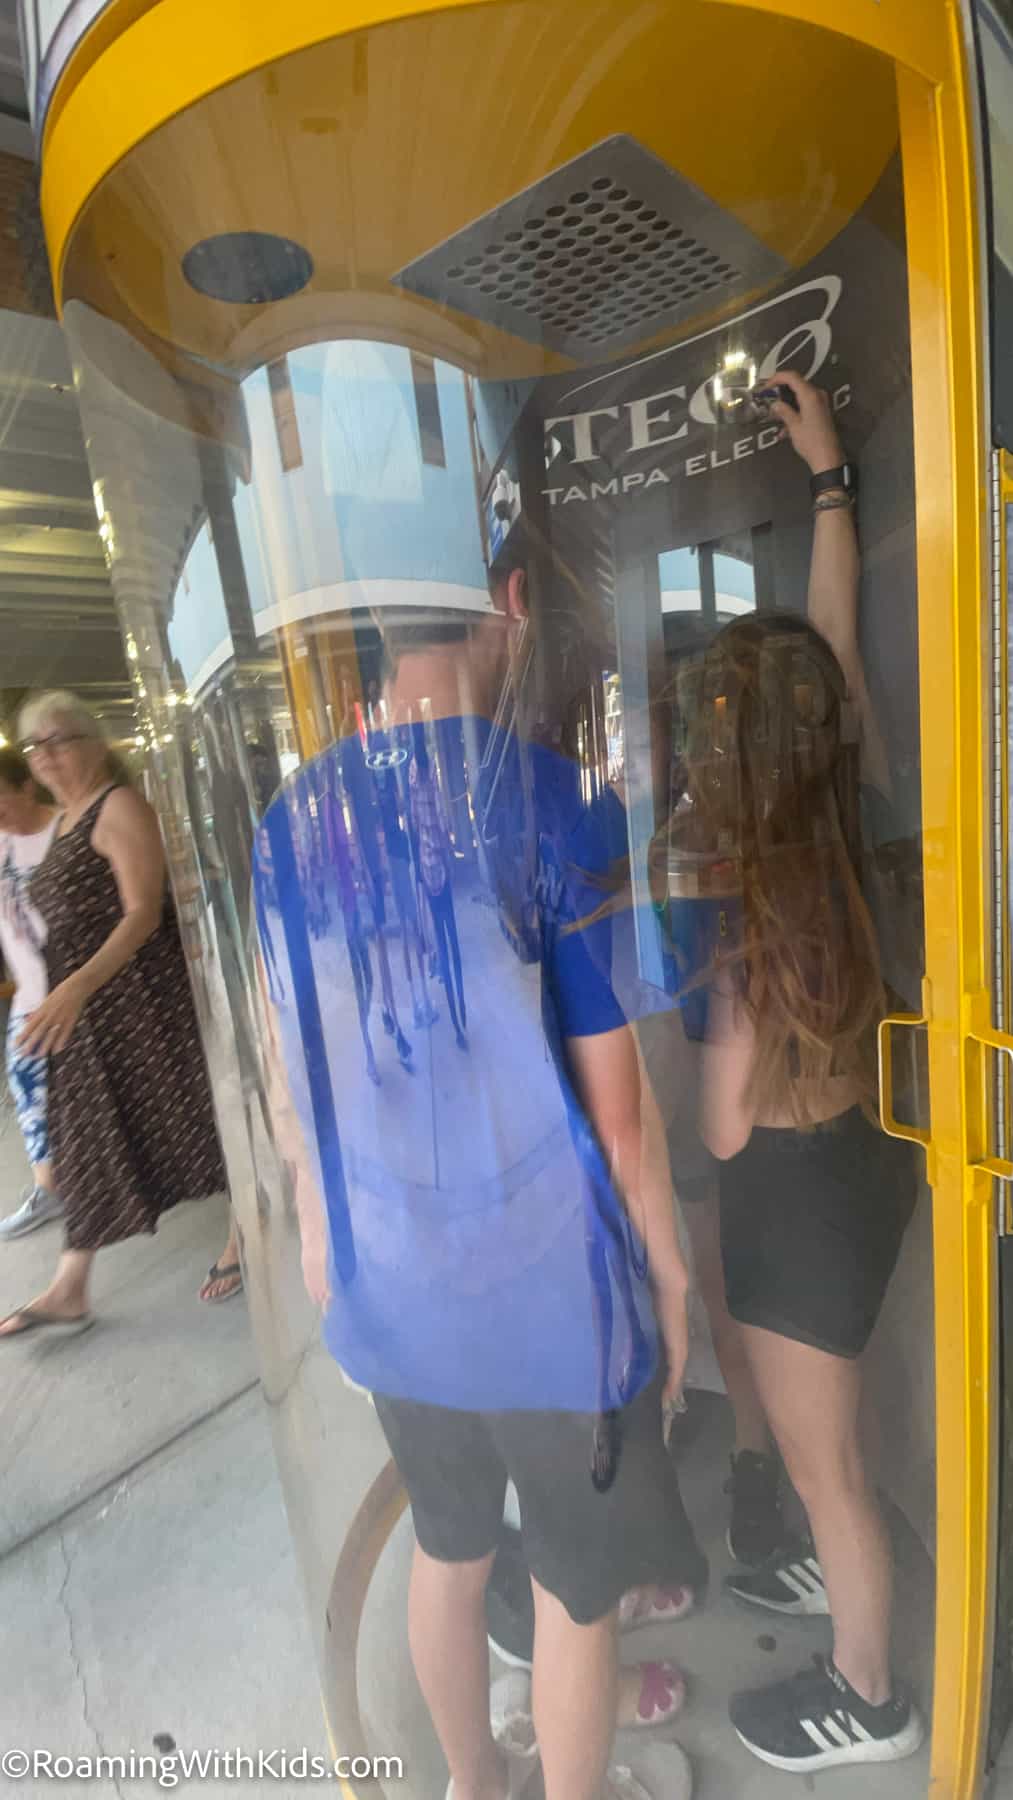 hurricane simulator at Manatee Viewing Center and Education Center at Tampa Electric in Tampa Florida